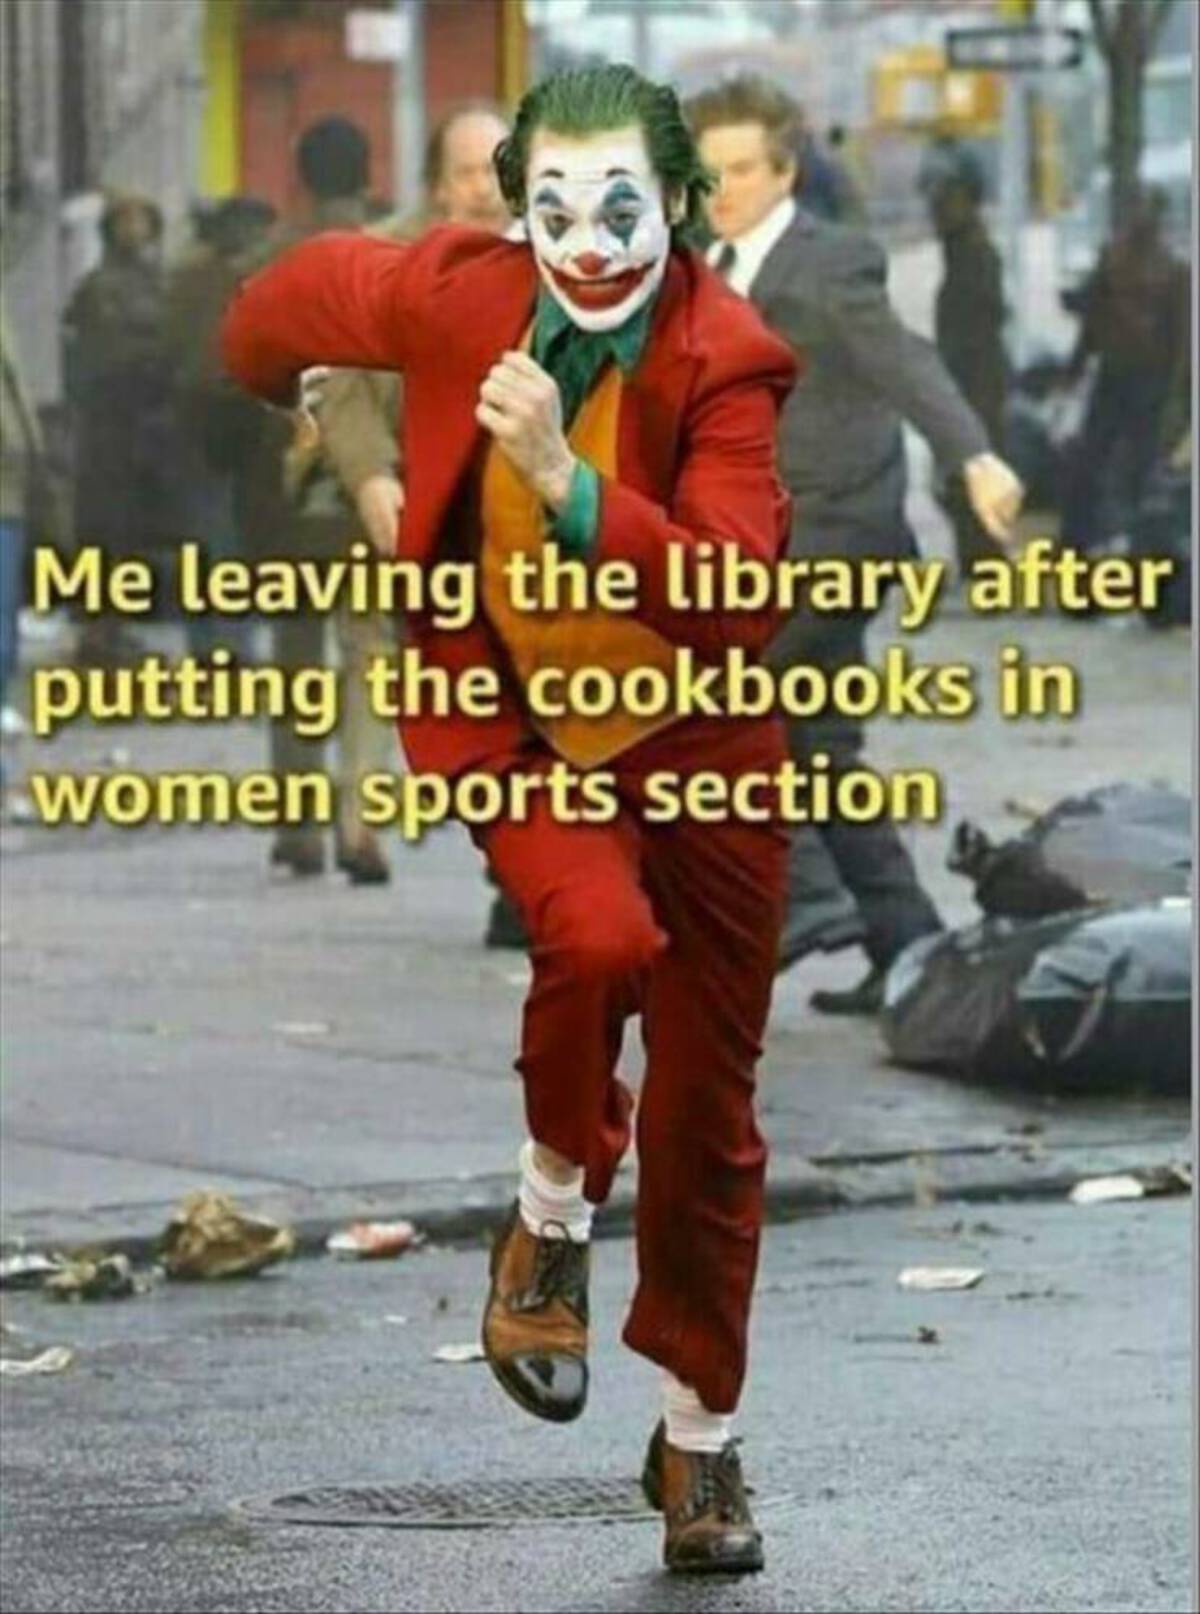 me leaving petsmart after teaching the parrots - Me leaving the library after putting the cookbooks in women sports section